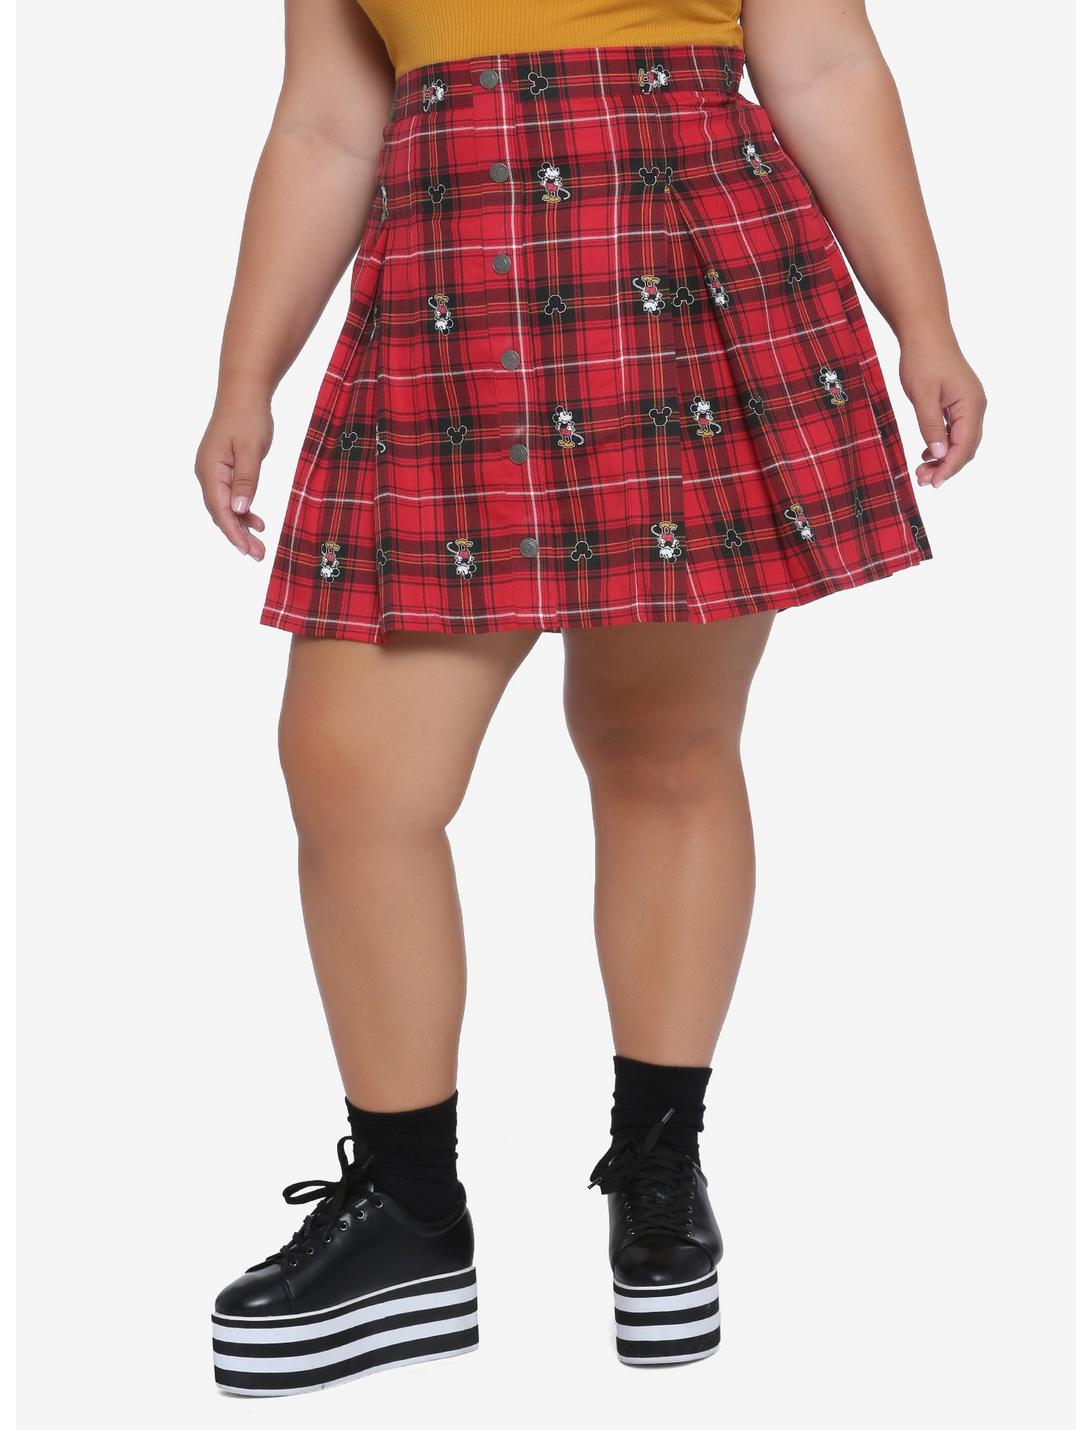 Disney Mickey Mouse Plaid Pleated Skirt Plus Size, RED, hi-res